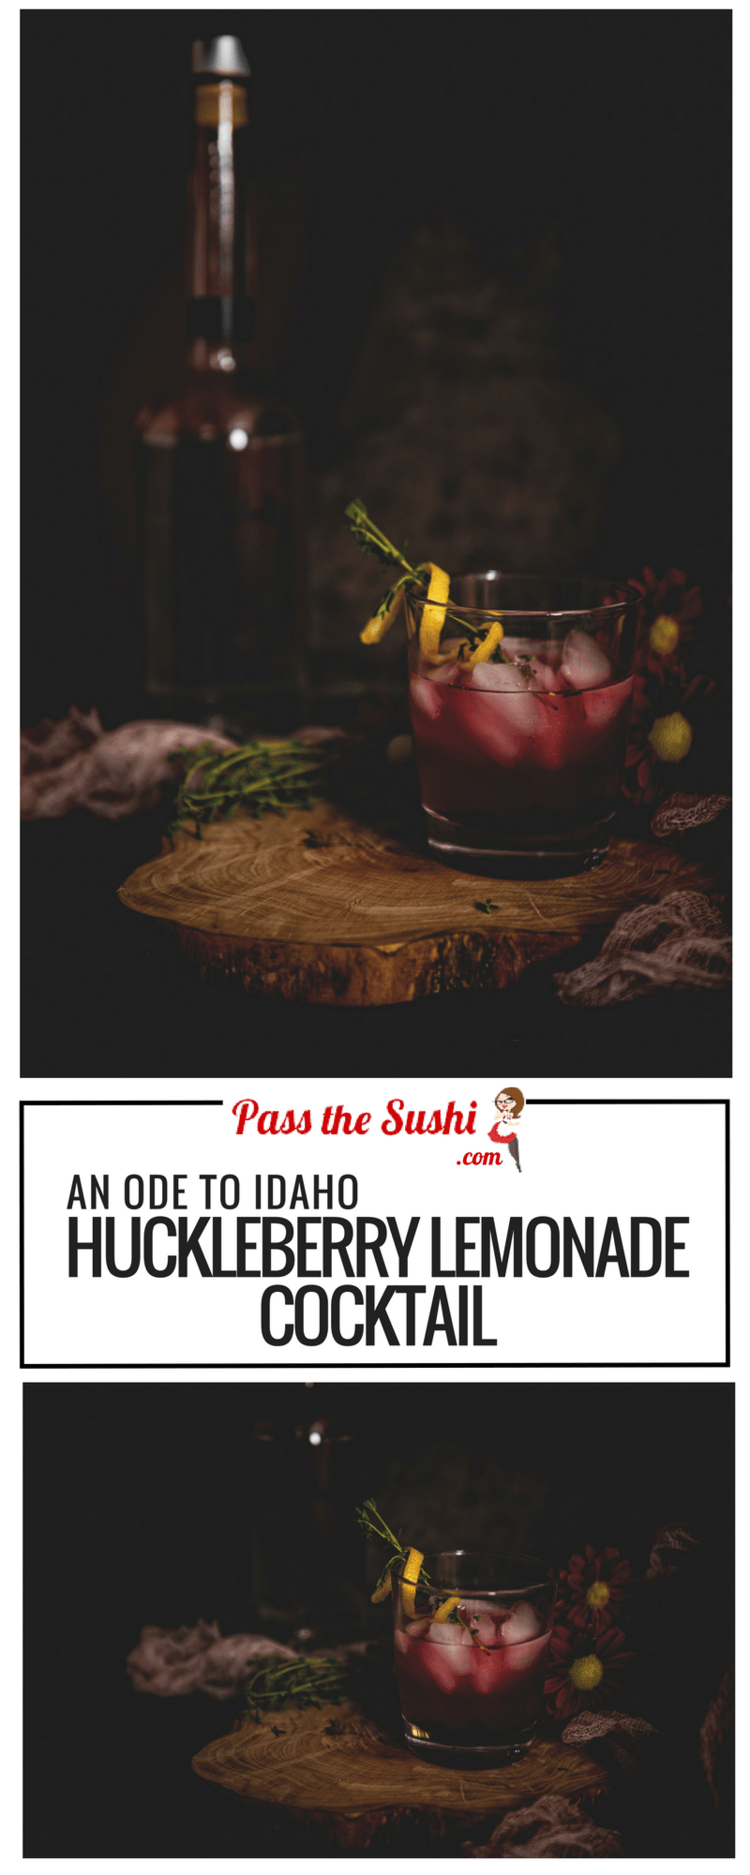 A fresh mix of Idaho's signature huckleberry plant blended three ways with local vodka and a splash of limoncello. The Huckleberry Lemonade Cocktail is a fun twist to celebrate a state. Now, what would you name it? 